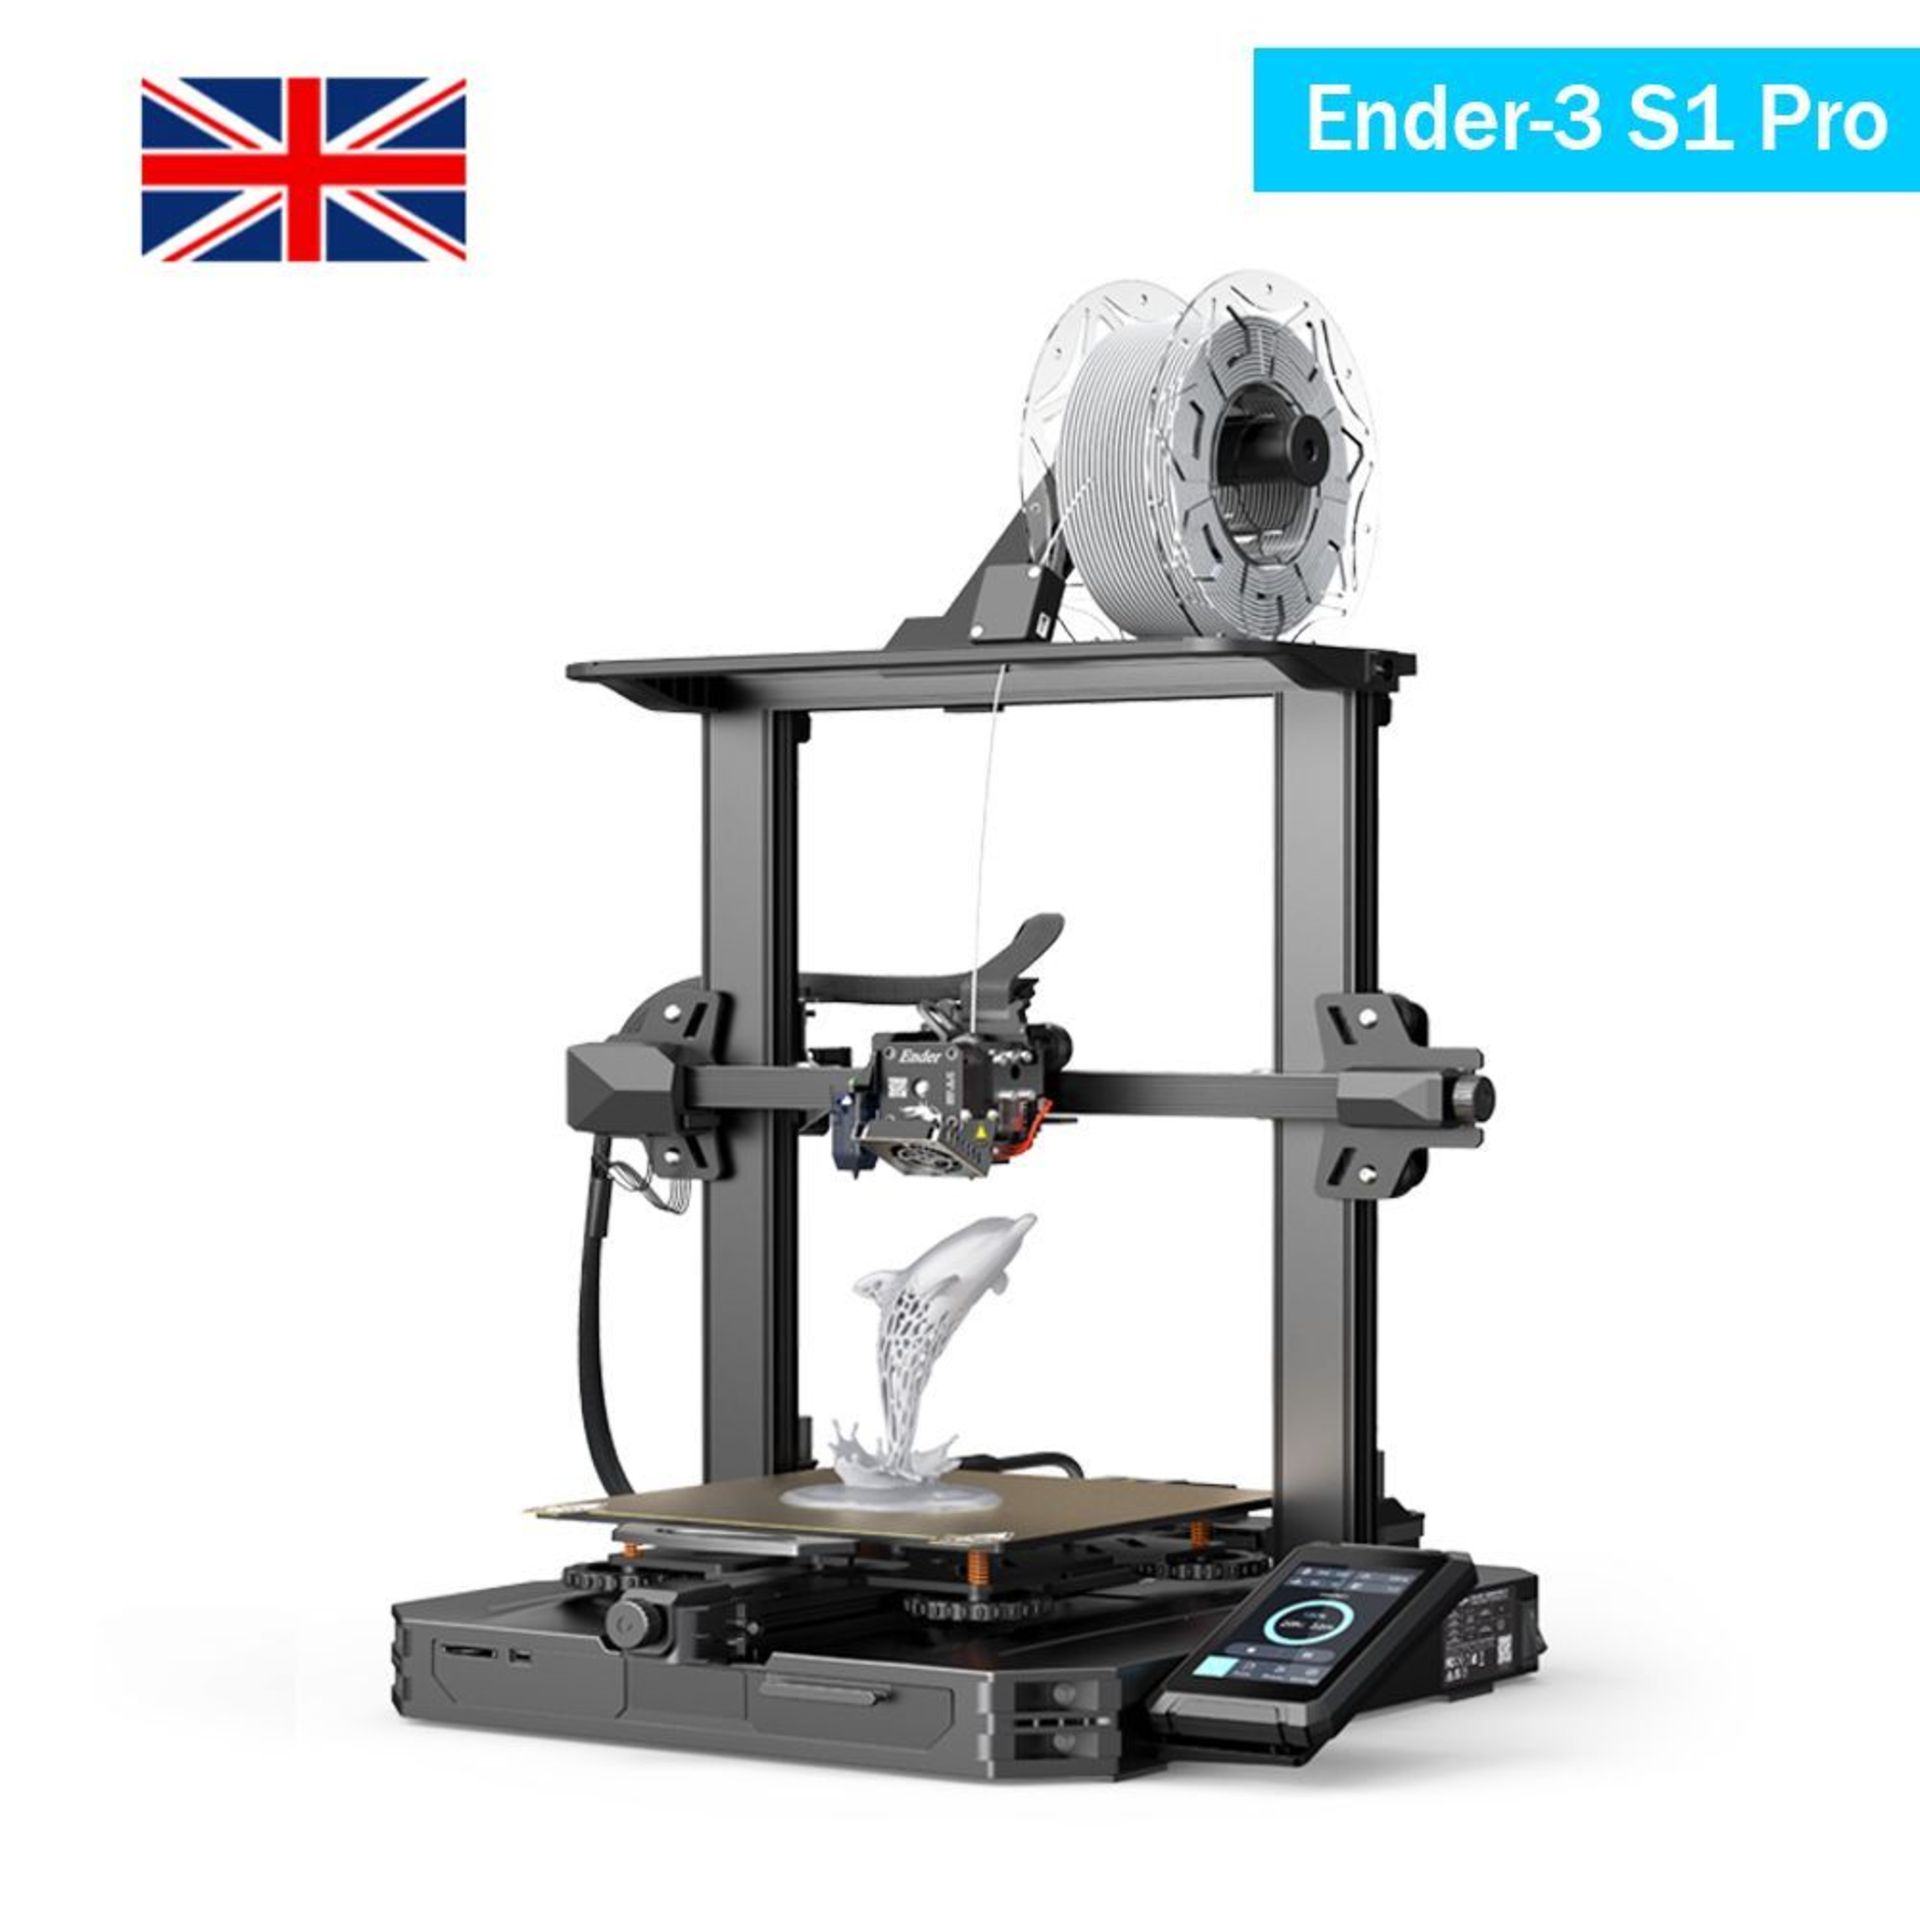 Creality Ender 3 S1 Pro 3D Printer. - P1. RRP £399.00. Equipped with CR Touch, the 16-point - Image 2 of 2